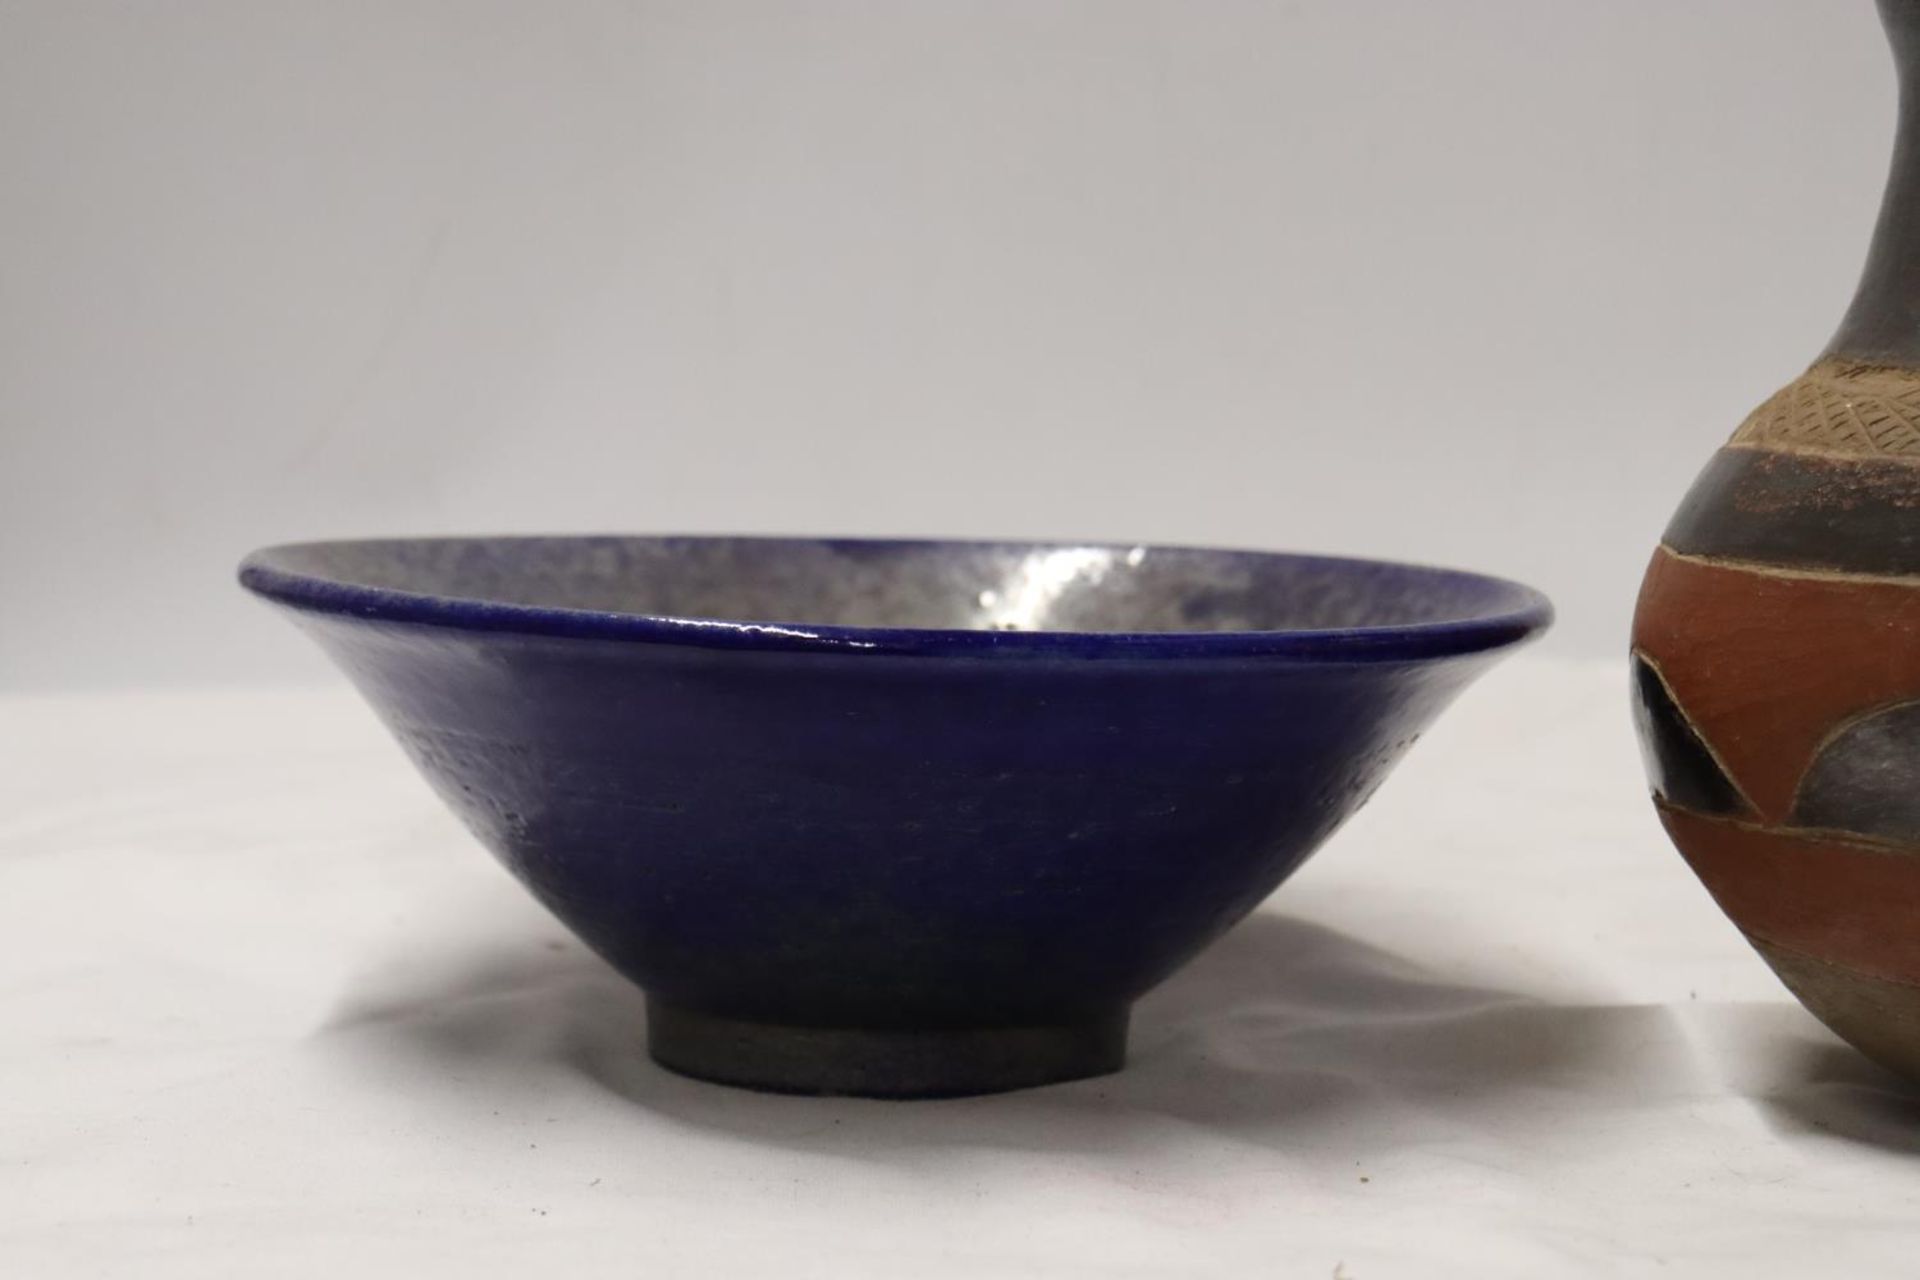 A BLUE AND PEARLESCENT STUDIO POTTERY STYLE BOWL TOGETHER WITH A STONEWARE JUG - Image 2 of 4